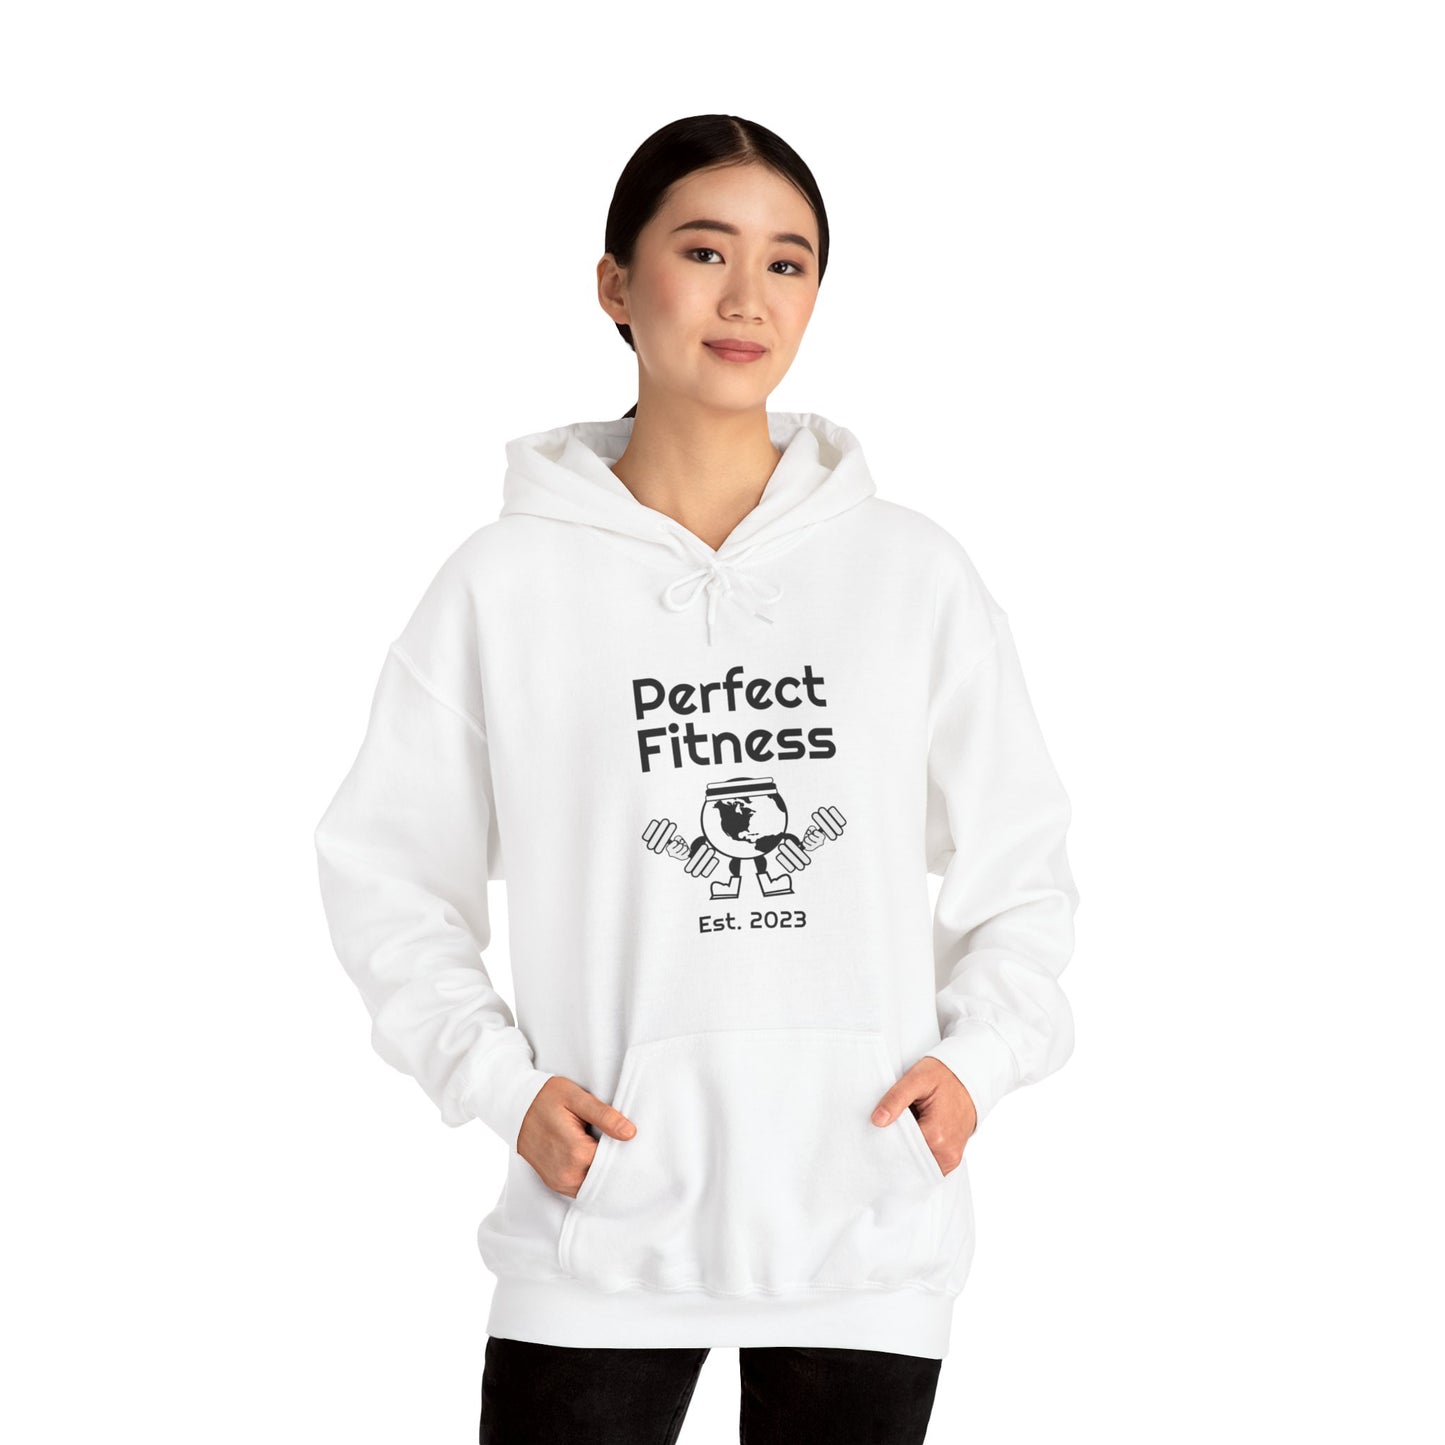 "Perfect Fitness" Hoodie